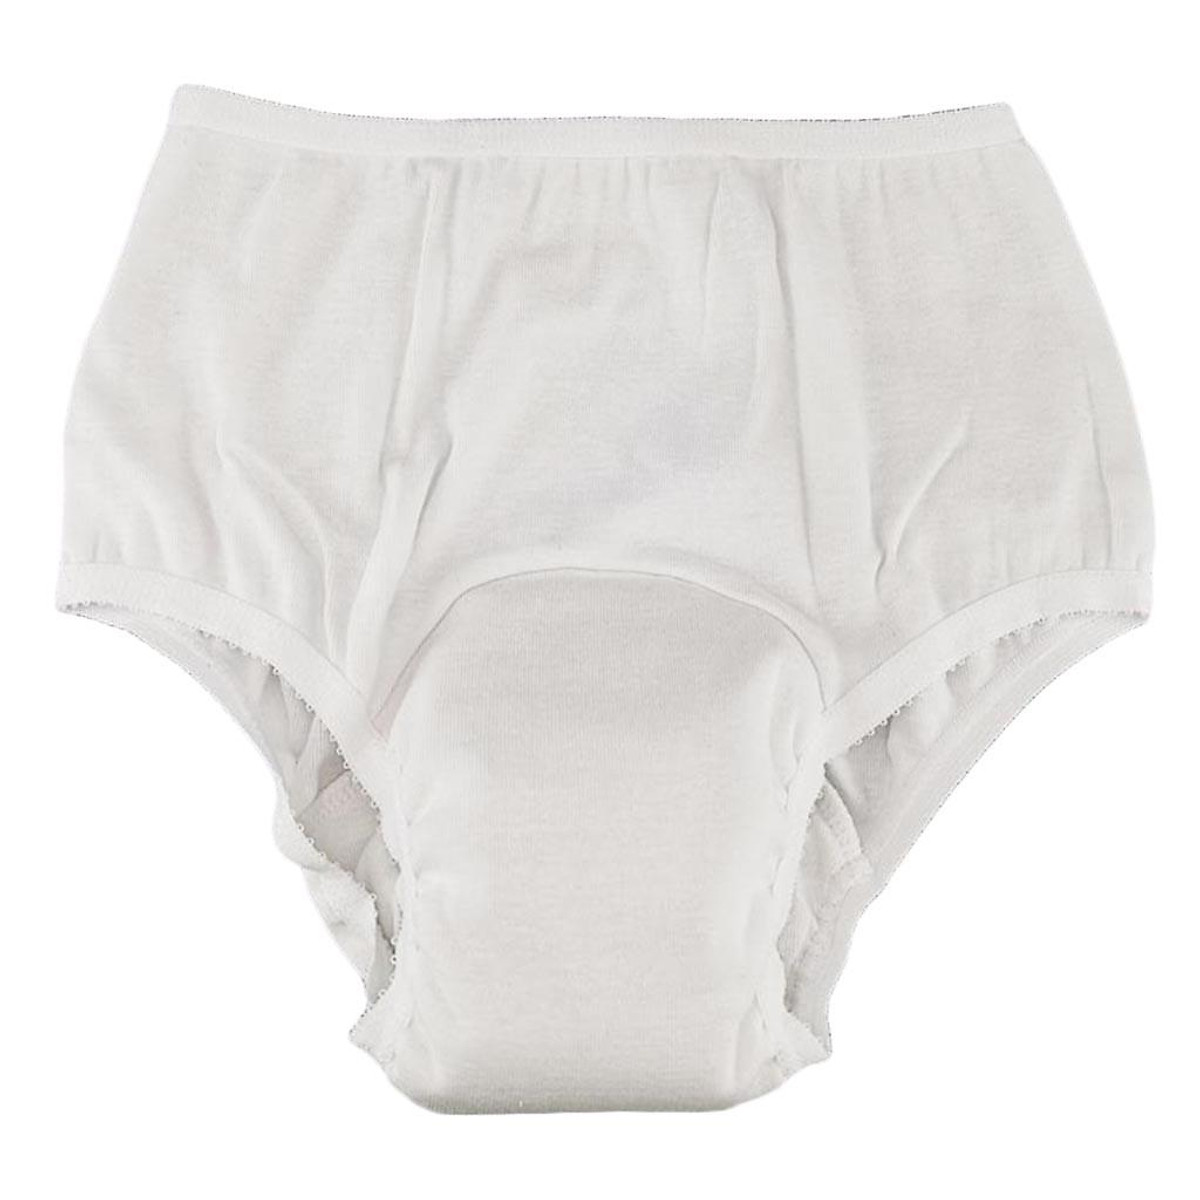 Adult Pull-up Heavy Incontinence Underwear 1000ml | Caring Clothing